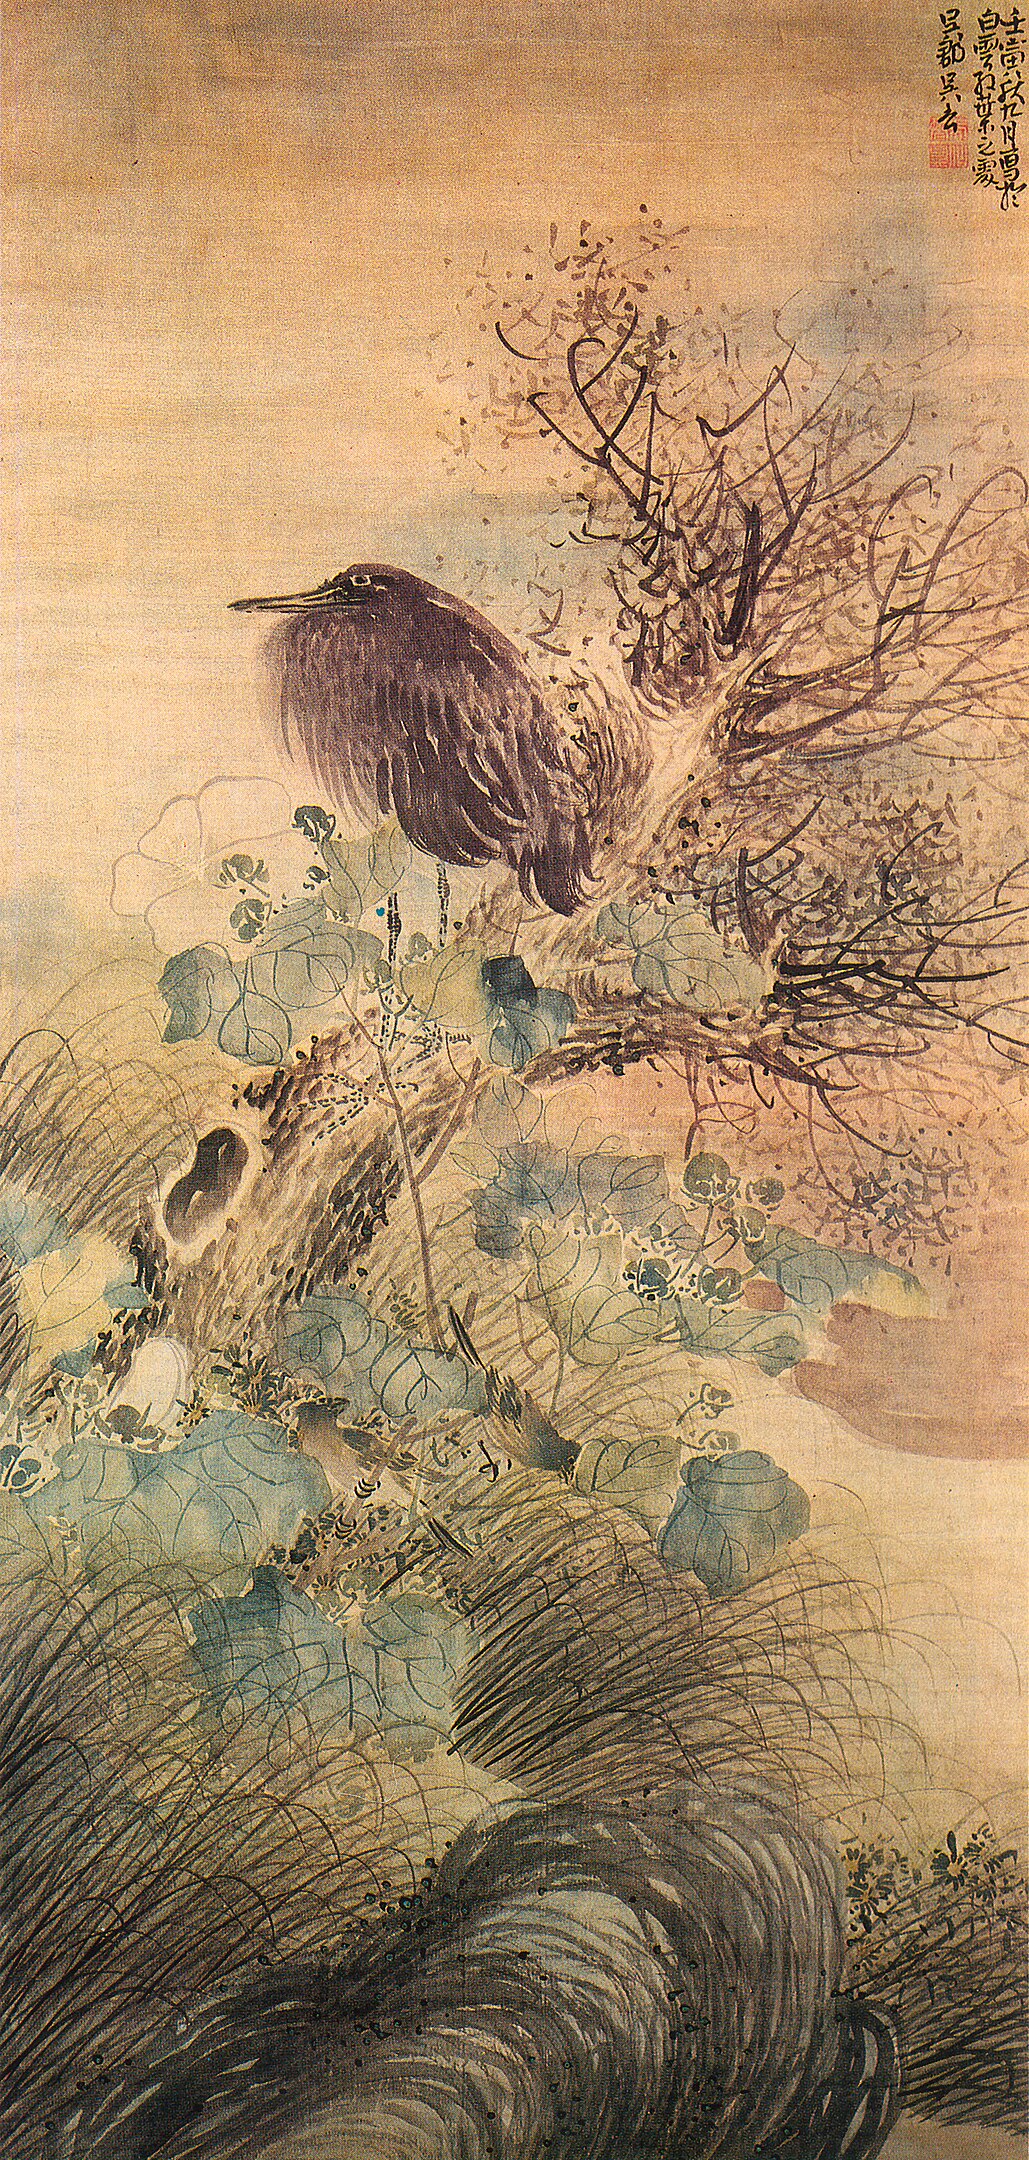 A bird perched on a slanted tree with flowers blooming along its side and on the ground